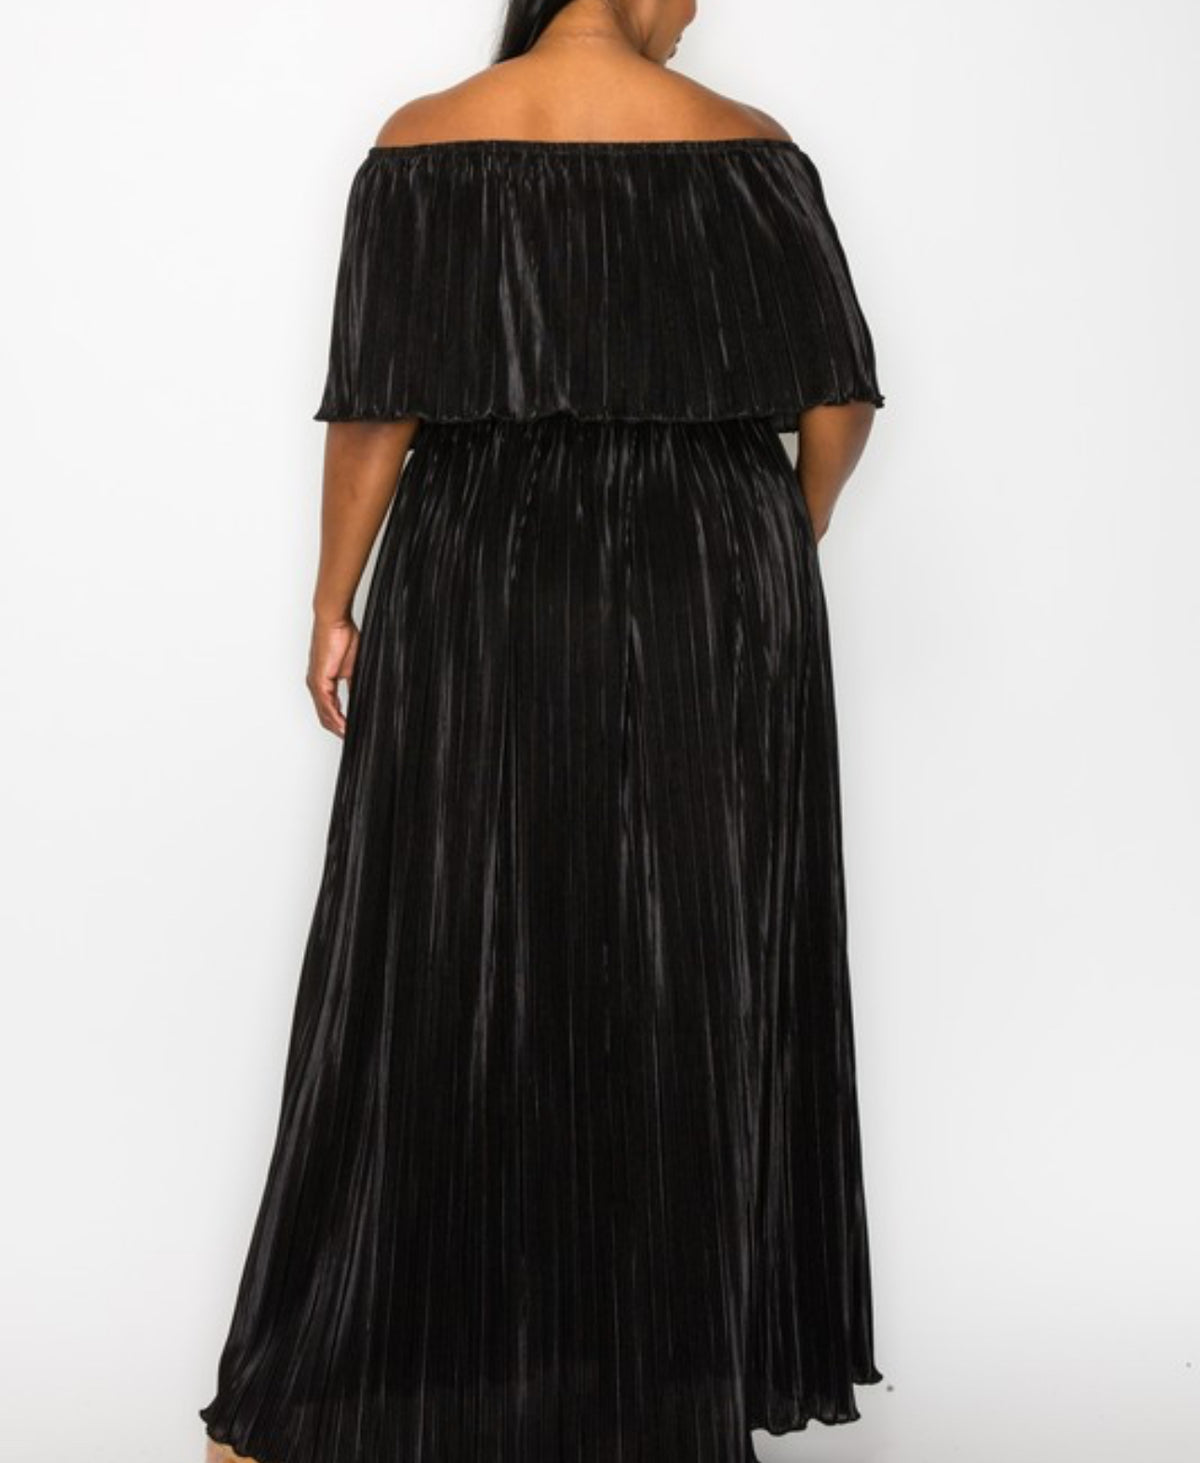 Black Pleated Off The Shoulder Maxi Dress - Fabulously Dressed Boutique 